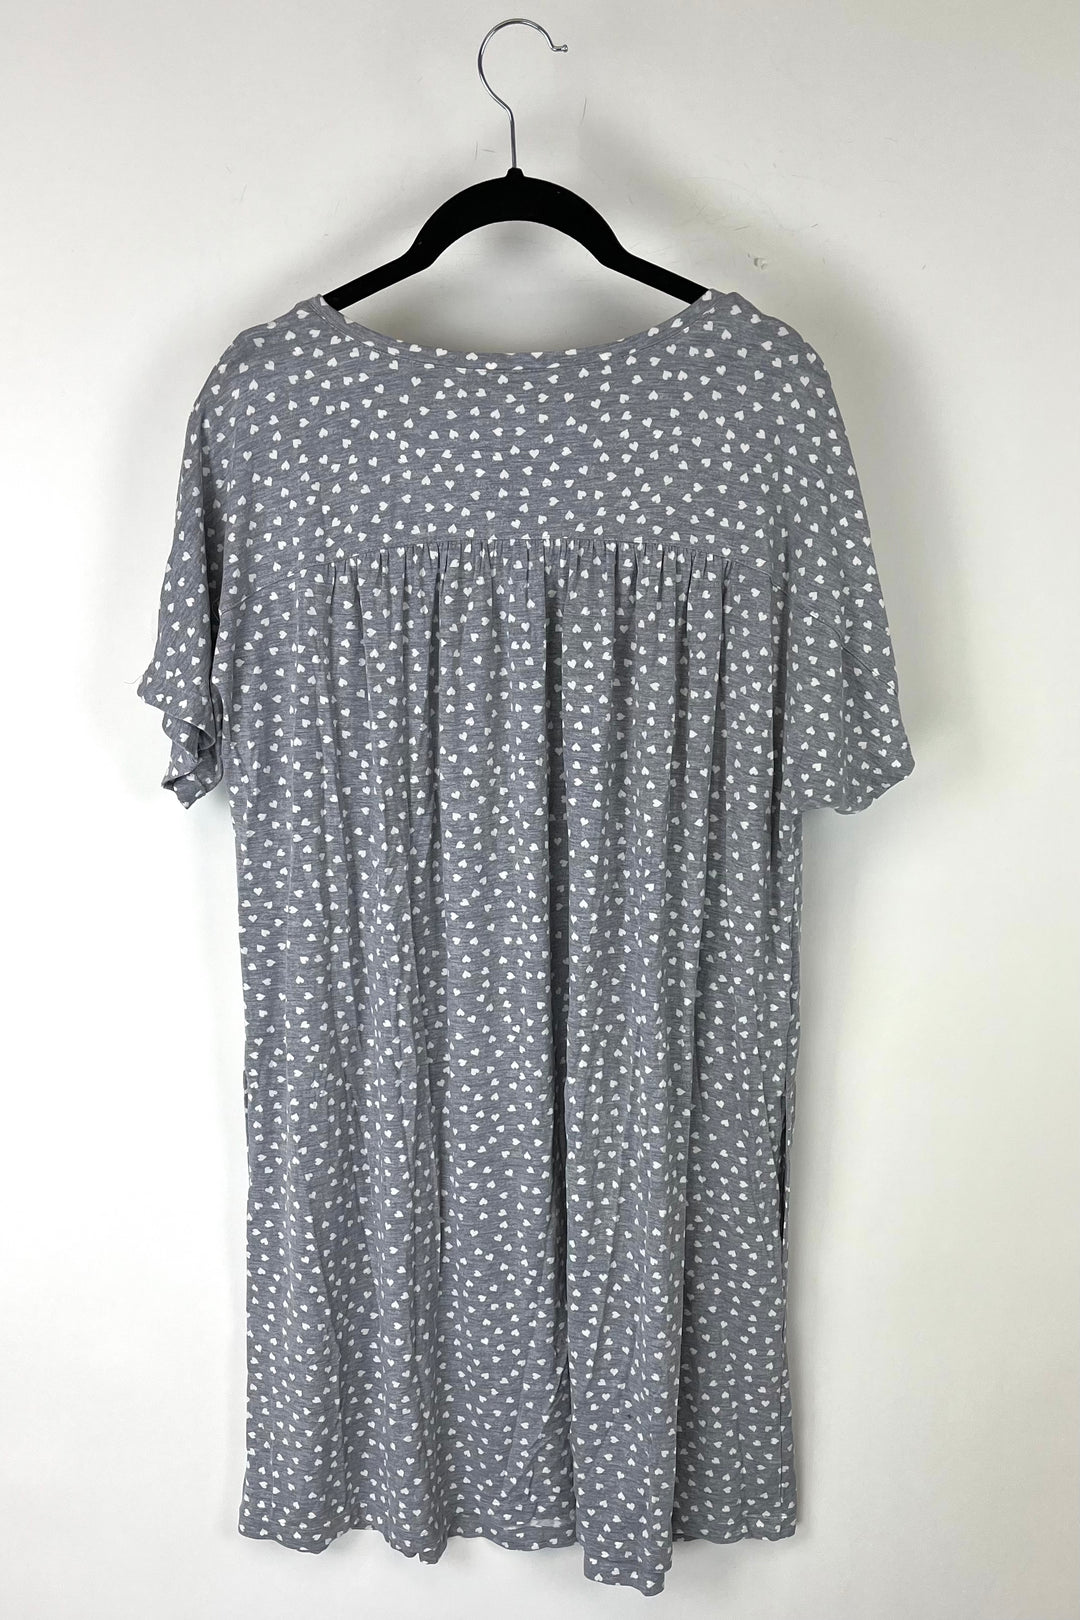 Grey and White Heart Print Nightgown - Small